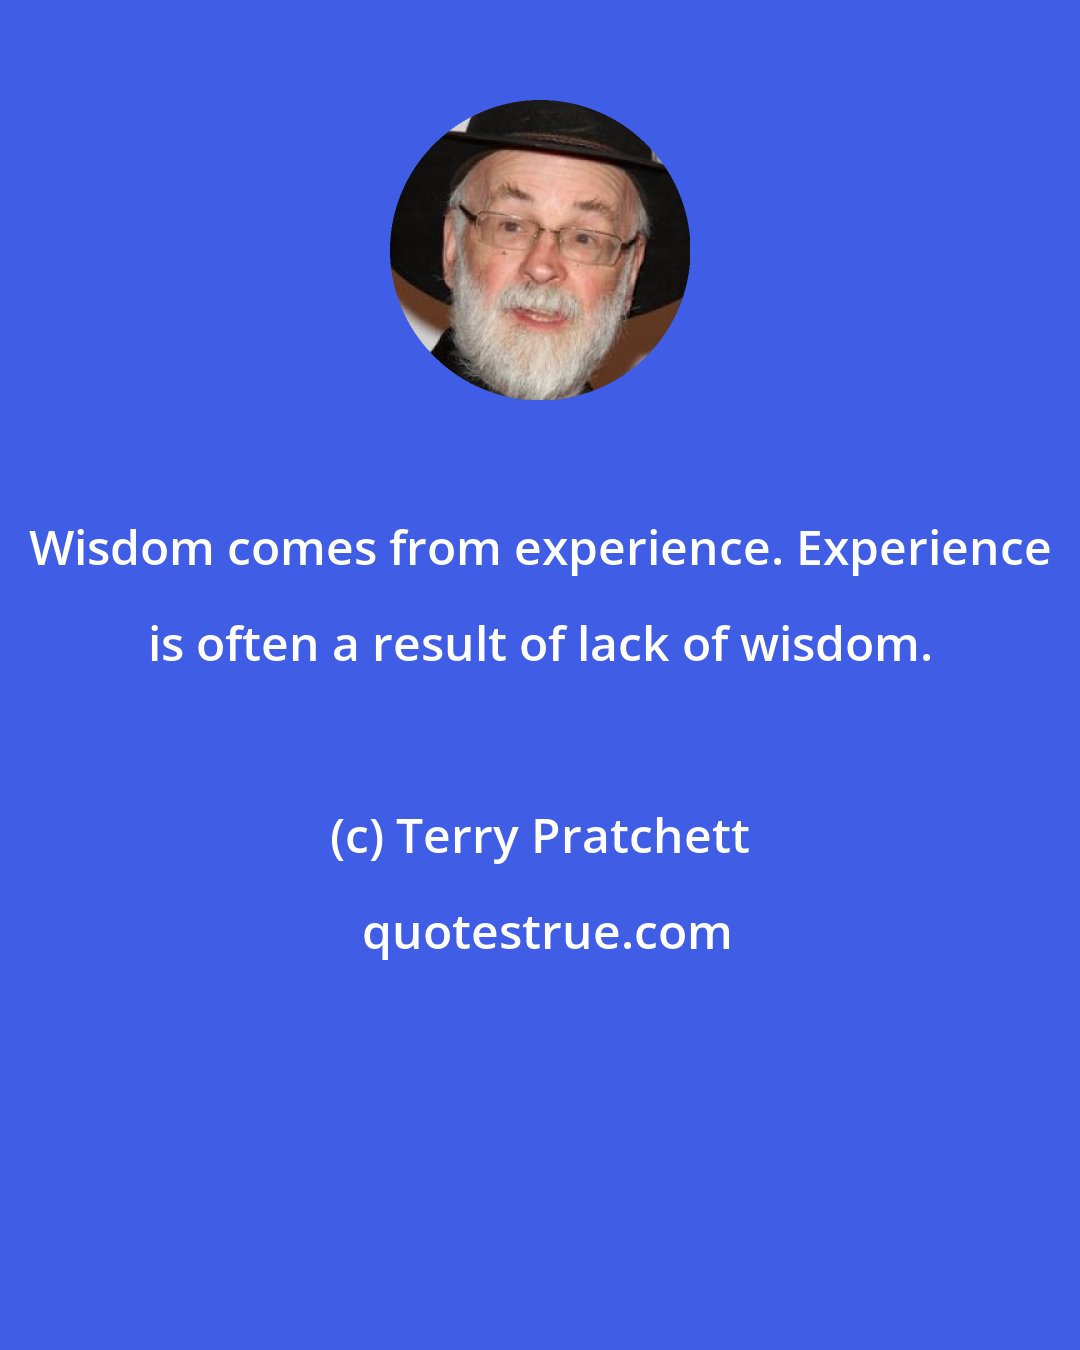 Terry Pratchett: Wisdom comes from experience. Experience is often a result of lack of wisdom.